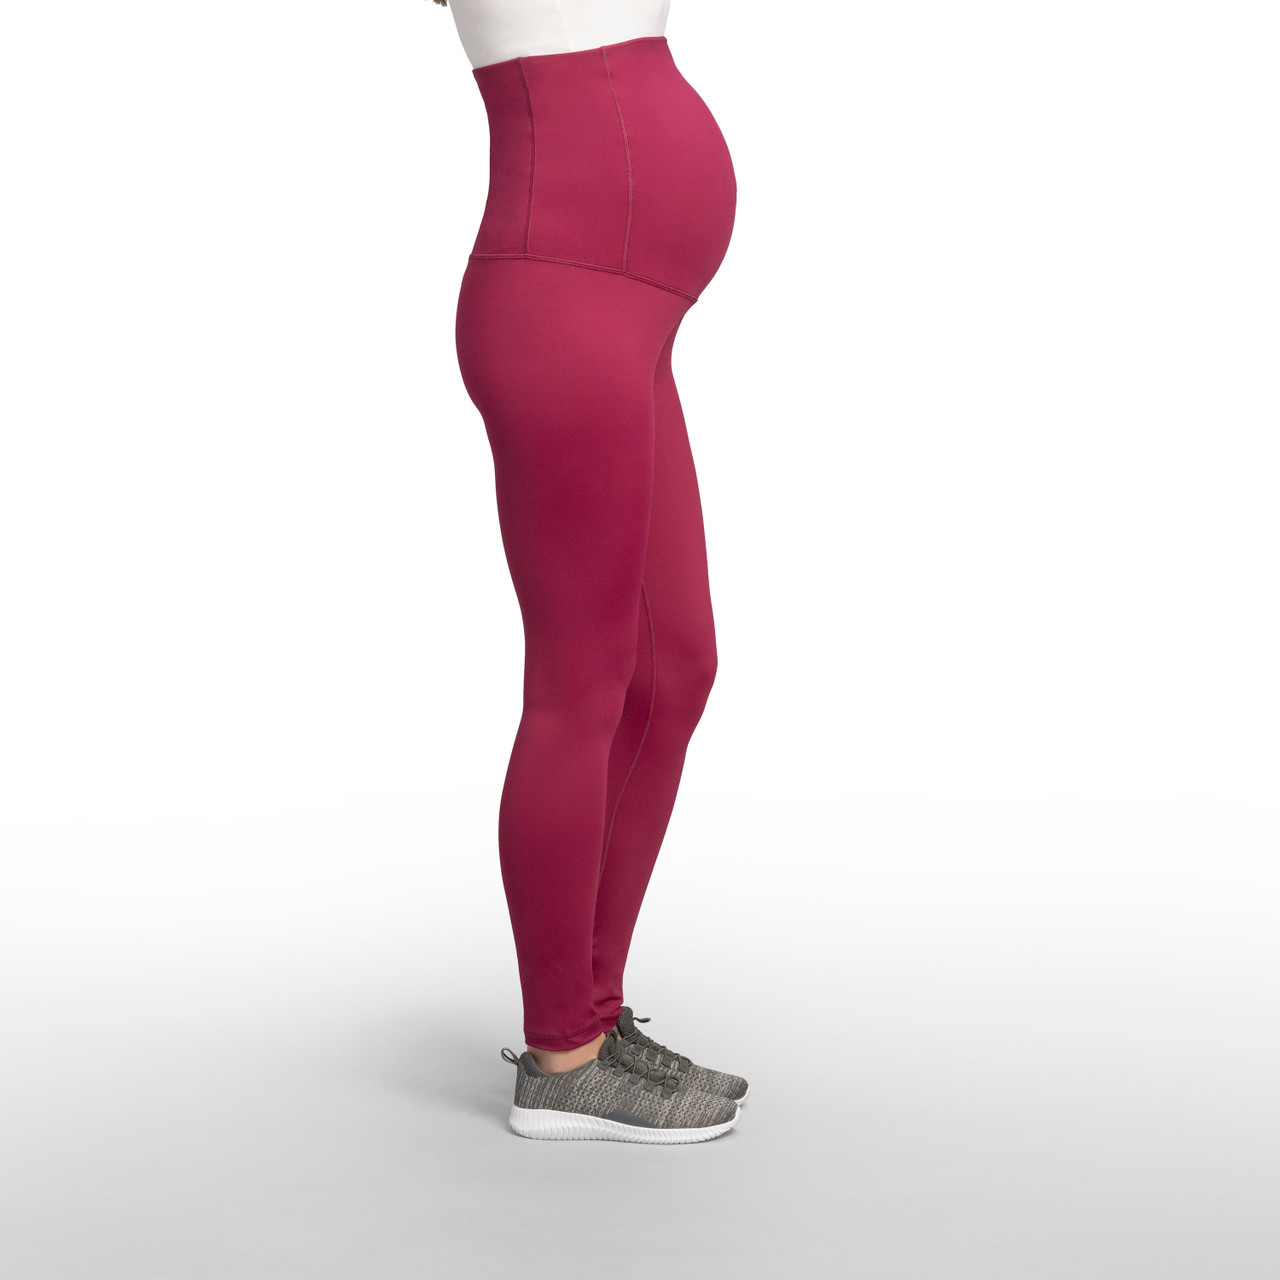 Discover more than 219 maternity and postpartum leggings